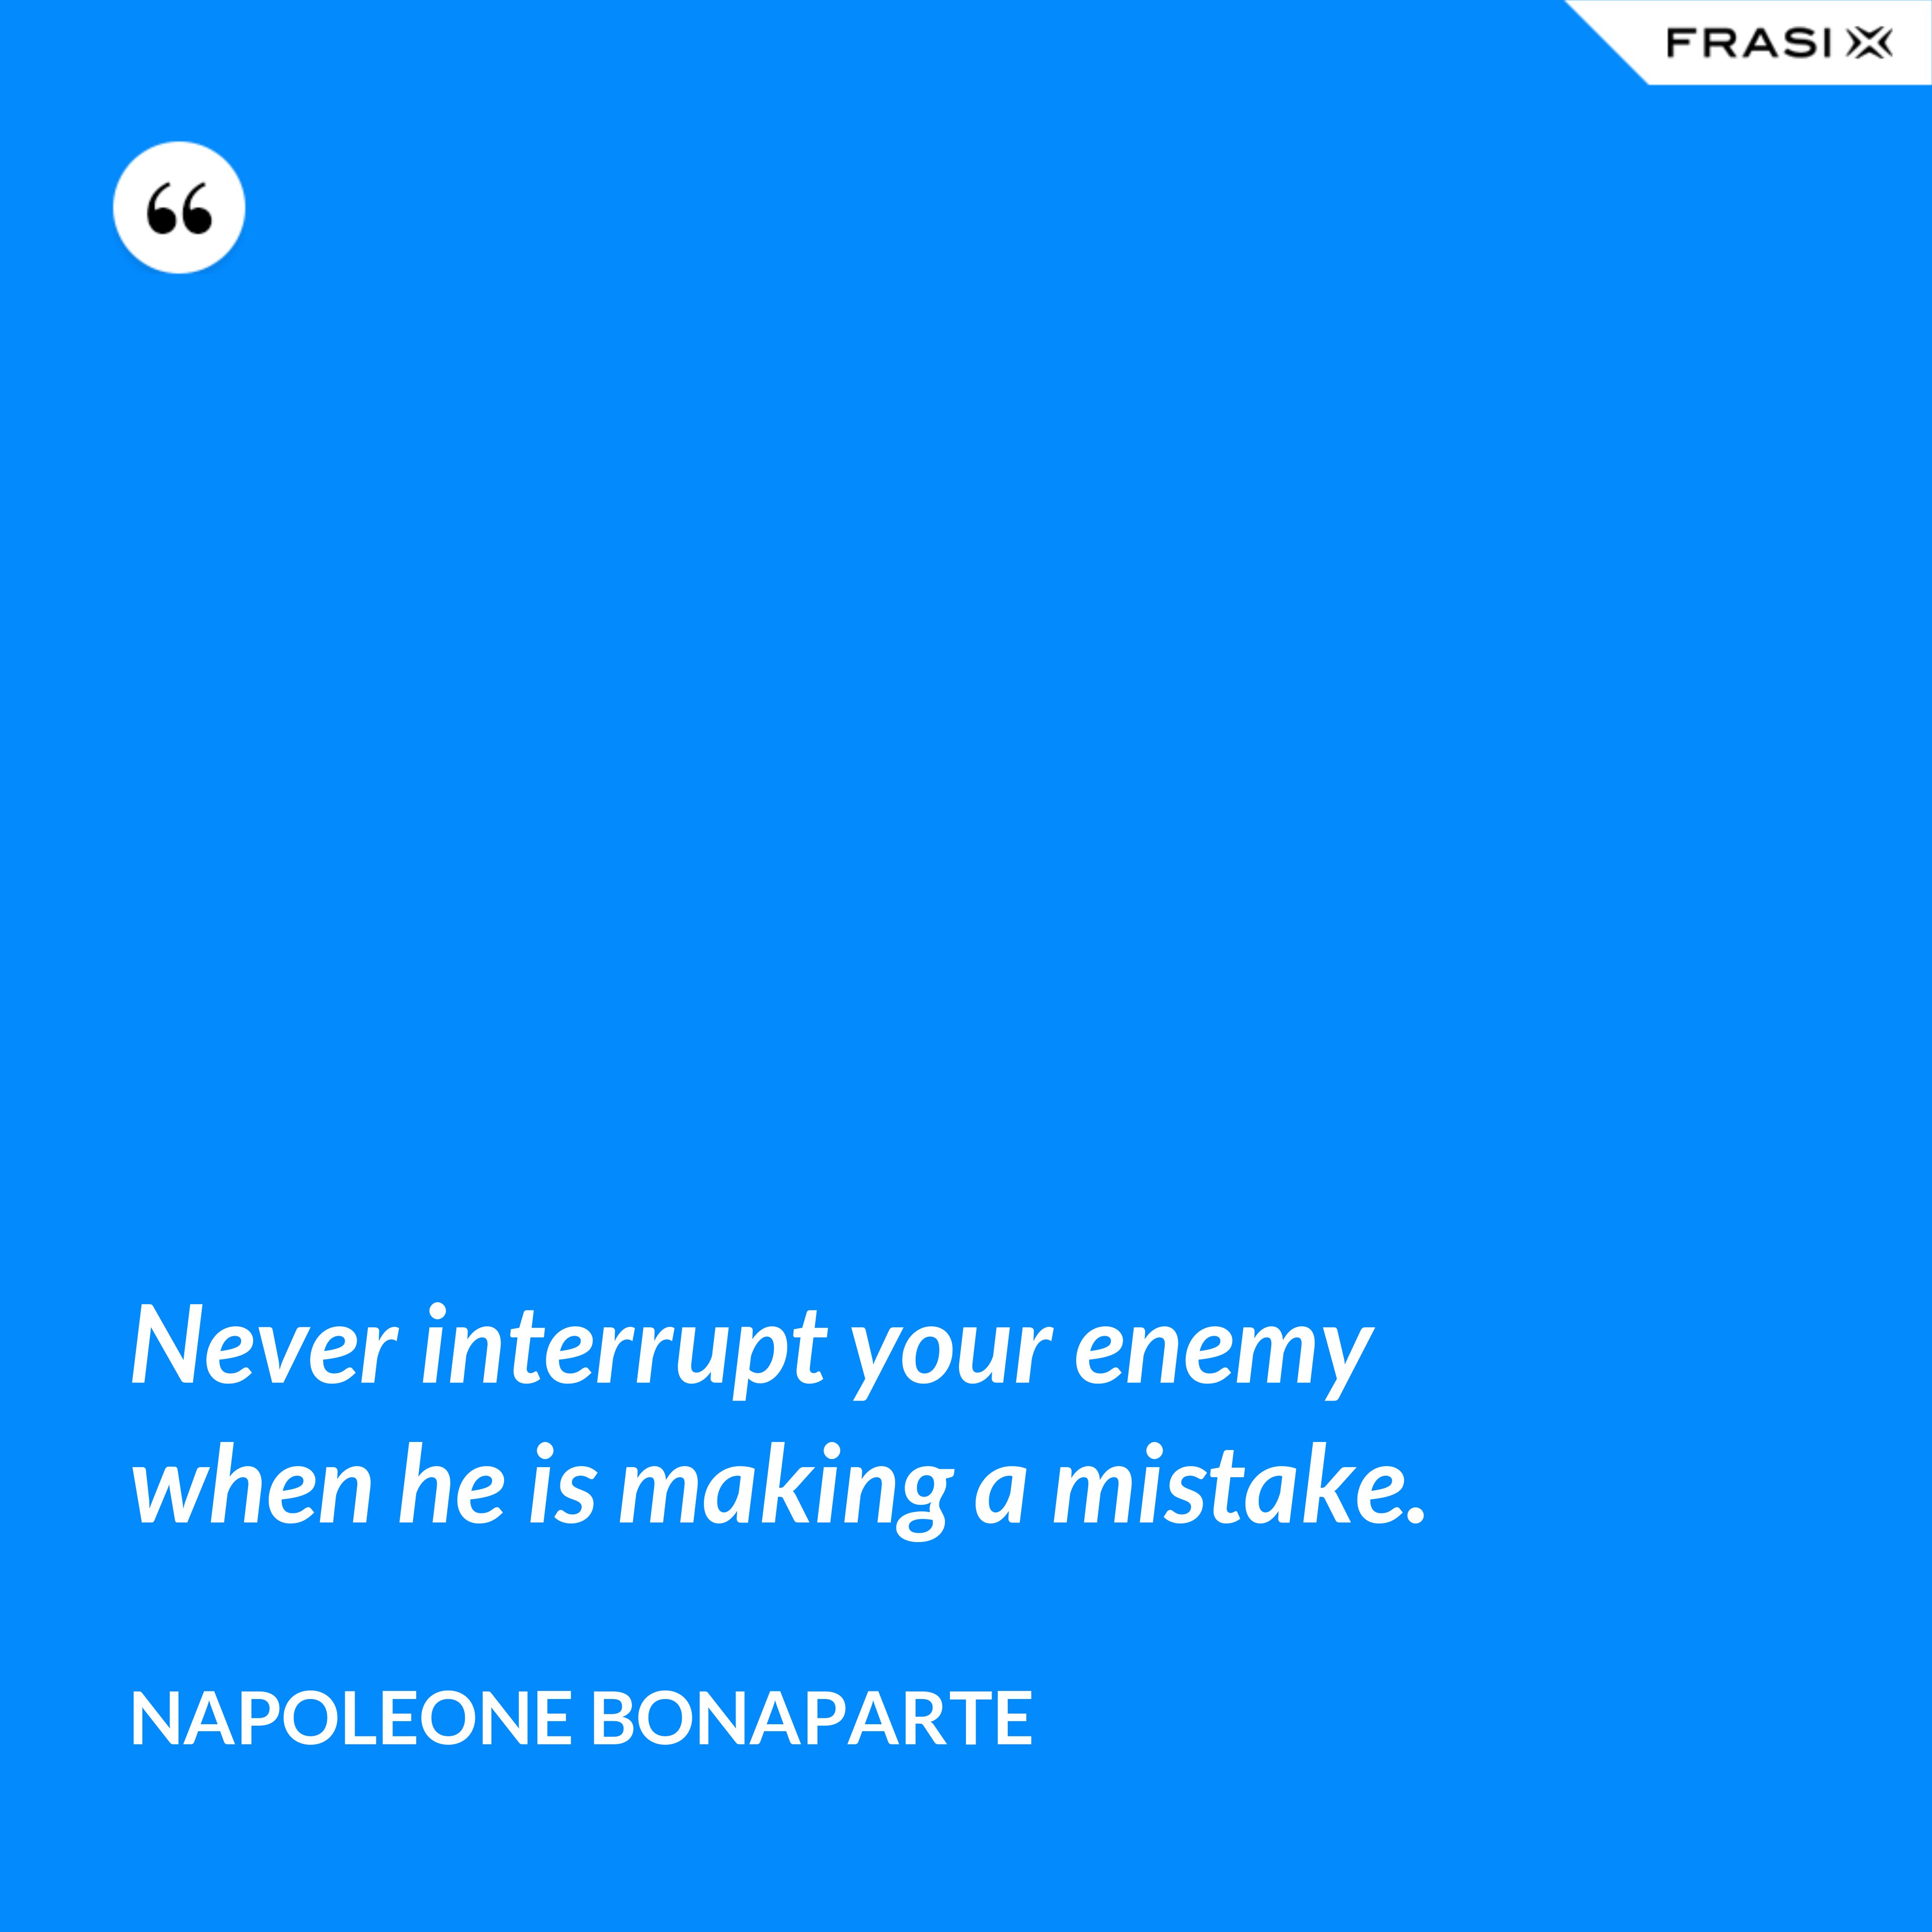 Never interrupt your enemy when he is making a mistake. - Napoleone Bonaparte